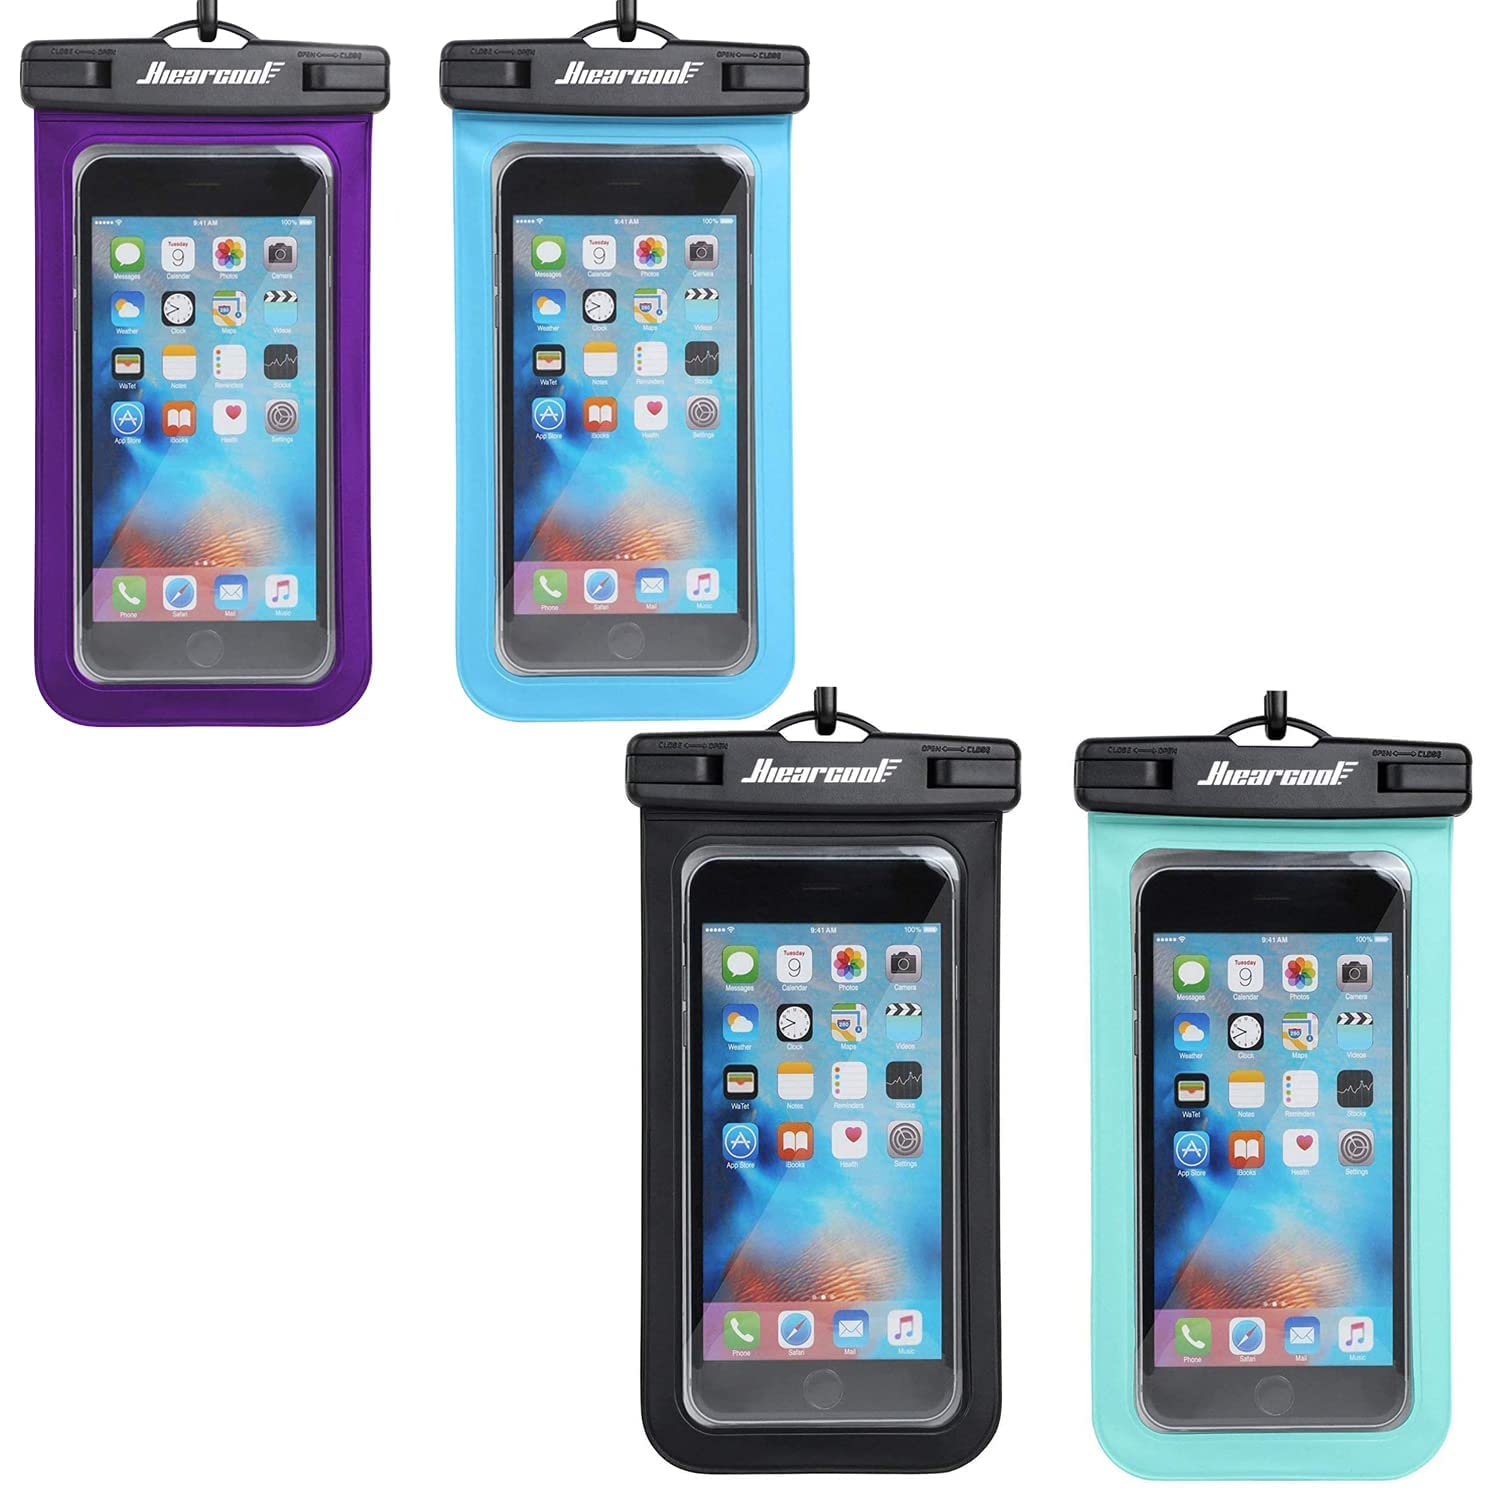 Universal Waterproof Case,Waterproof Phone Pouch Compatible for iPhone 12 Pro 11 Pro Max XS Max XR X 8 7 Samsung Galaxy s10/s9 Google Pixel 2 HTC Up to 7.0